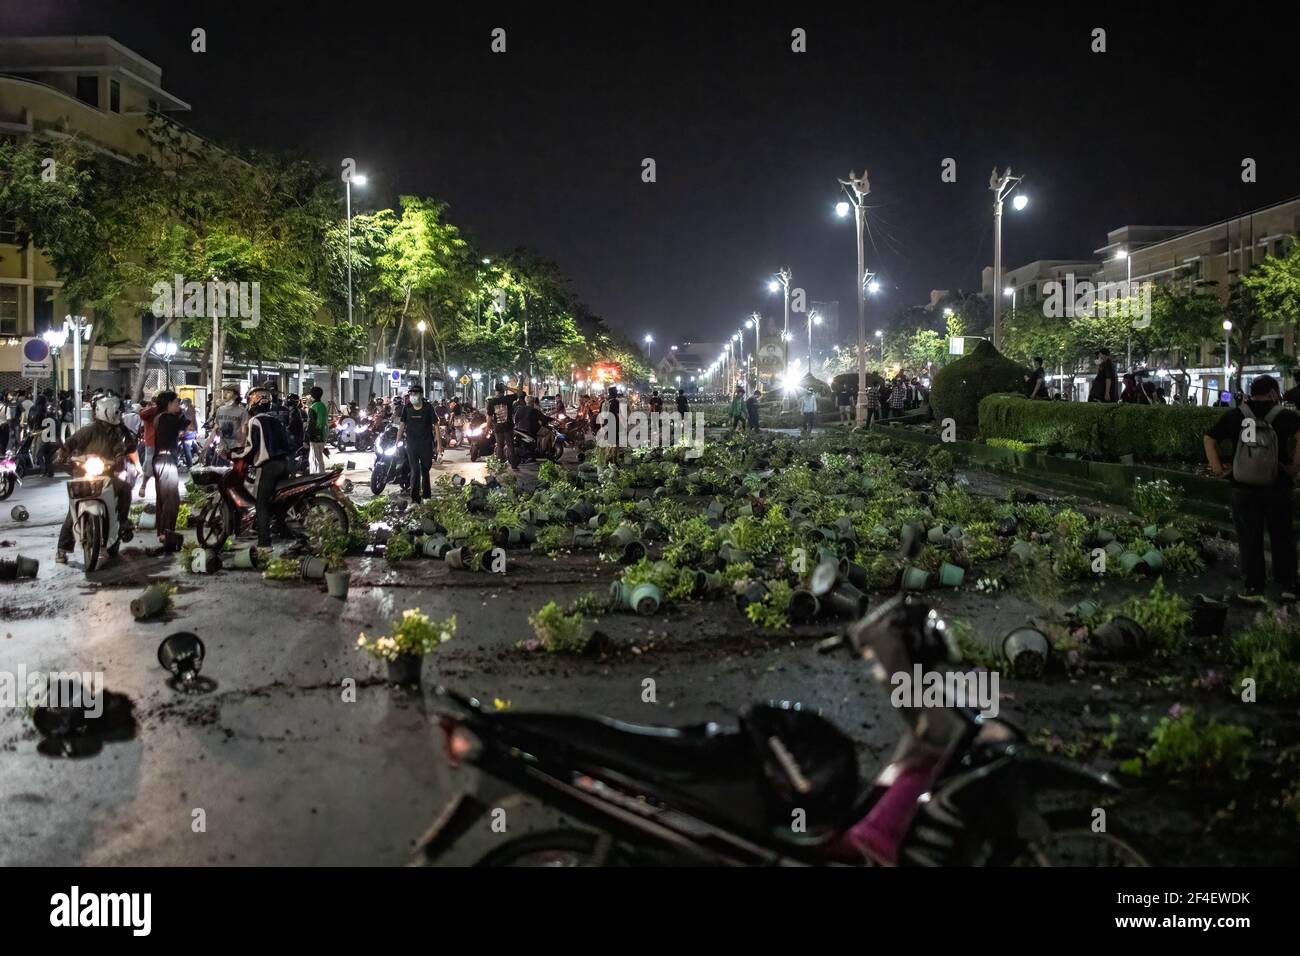 Pro democracy protesters vandalized the plants on Ratchadamnoen Avenue during an anti-government demonstration in Bangkok. Thousands of pro-democracy protesters gathered near the Grand Palace in Sanam Luang demanding the resignation of Thailand Prime Minister and the reform of the monarchy. The protesters also denounced the use of the Lese Majeste law under the section 112 of the penal code. The protest organized by REDEM (Restart Democracy) ended up with several clashes, the use of water cannon, tear gas and rubber bullet, which had left several injured. Stock Photo